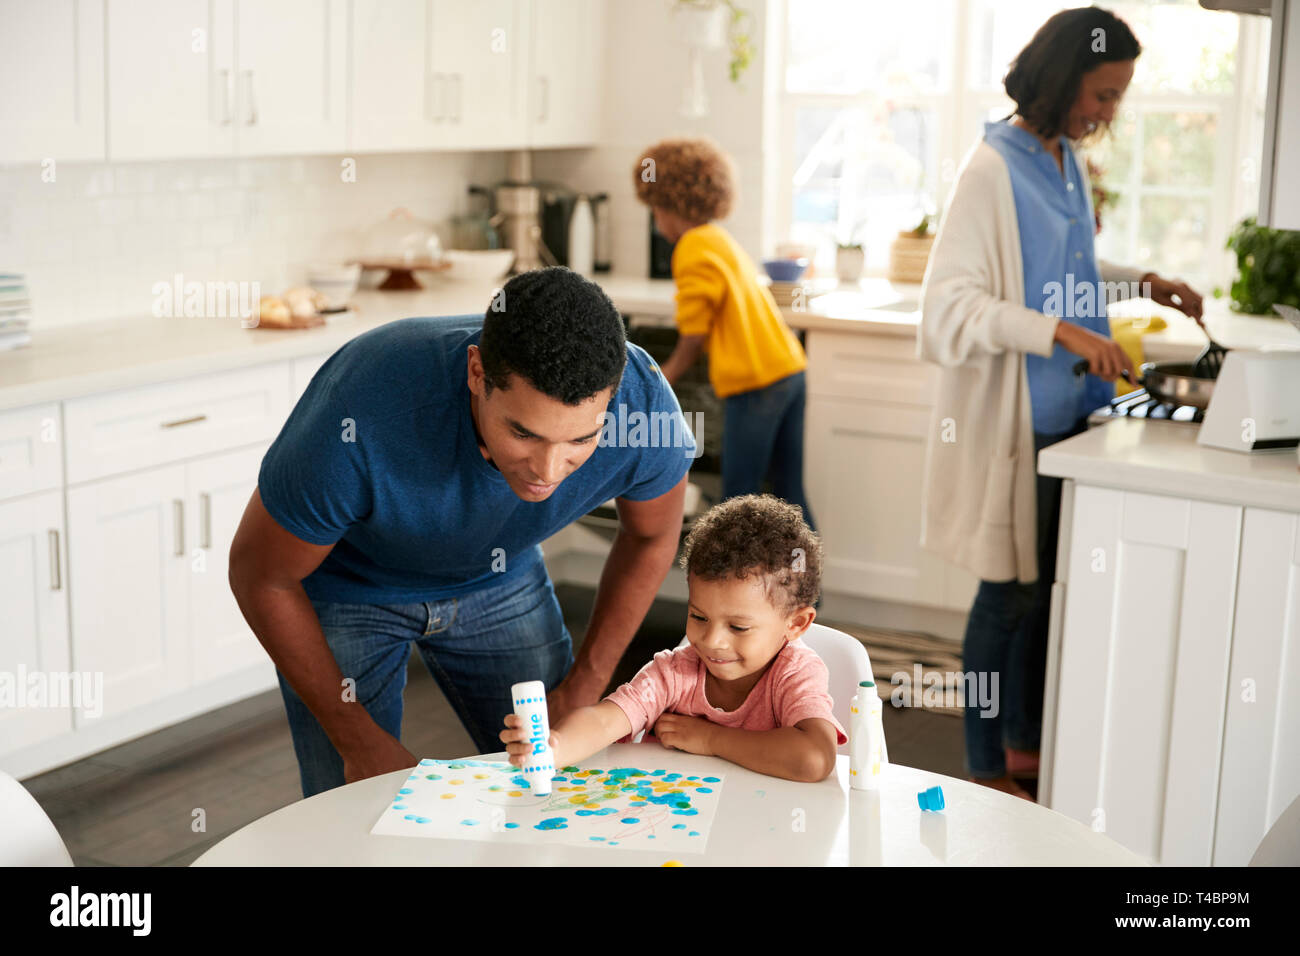 Dad watching his toddler son painting a picture sitting at a table in the kitchen, while mother and girl prepare food in the background Stock Photo